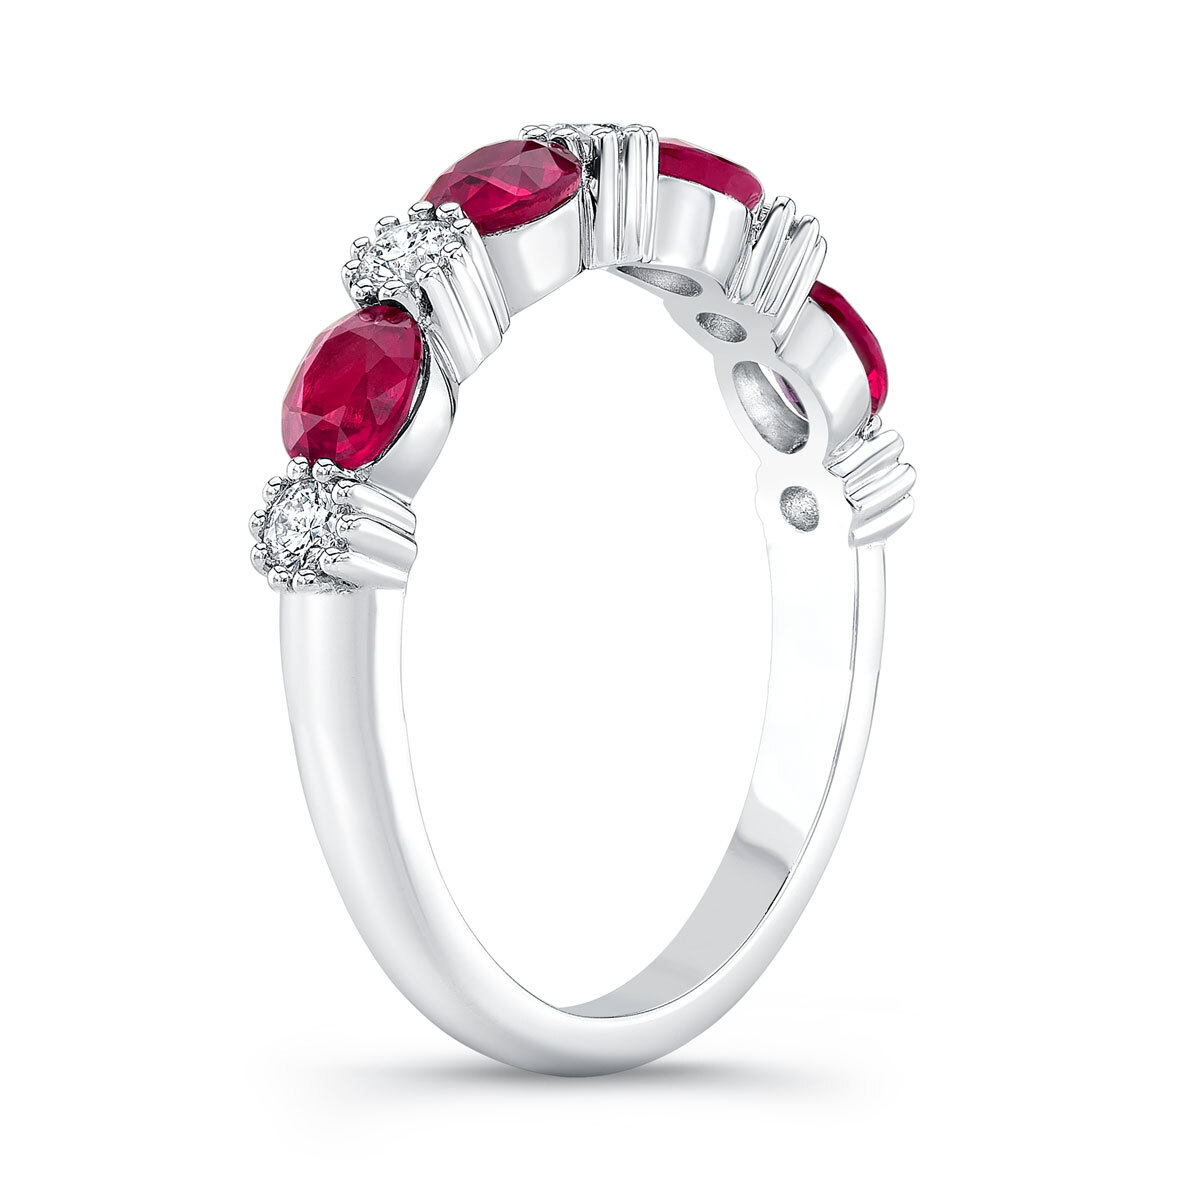 Diamond and Ruby Ring, 18kt White Gold